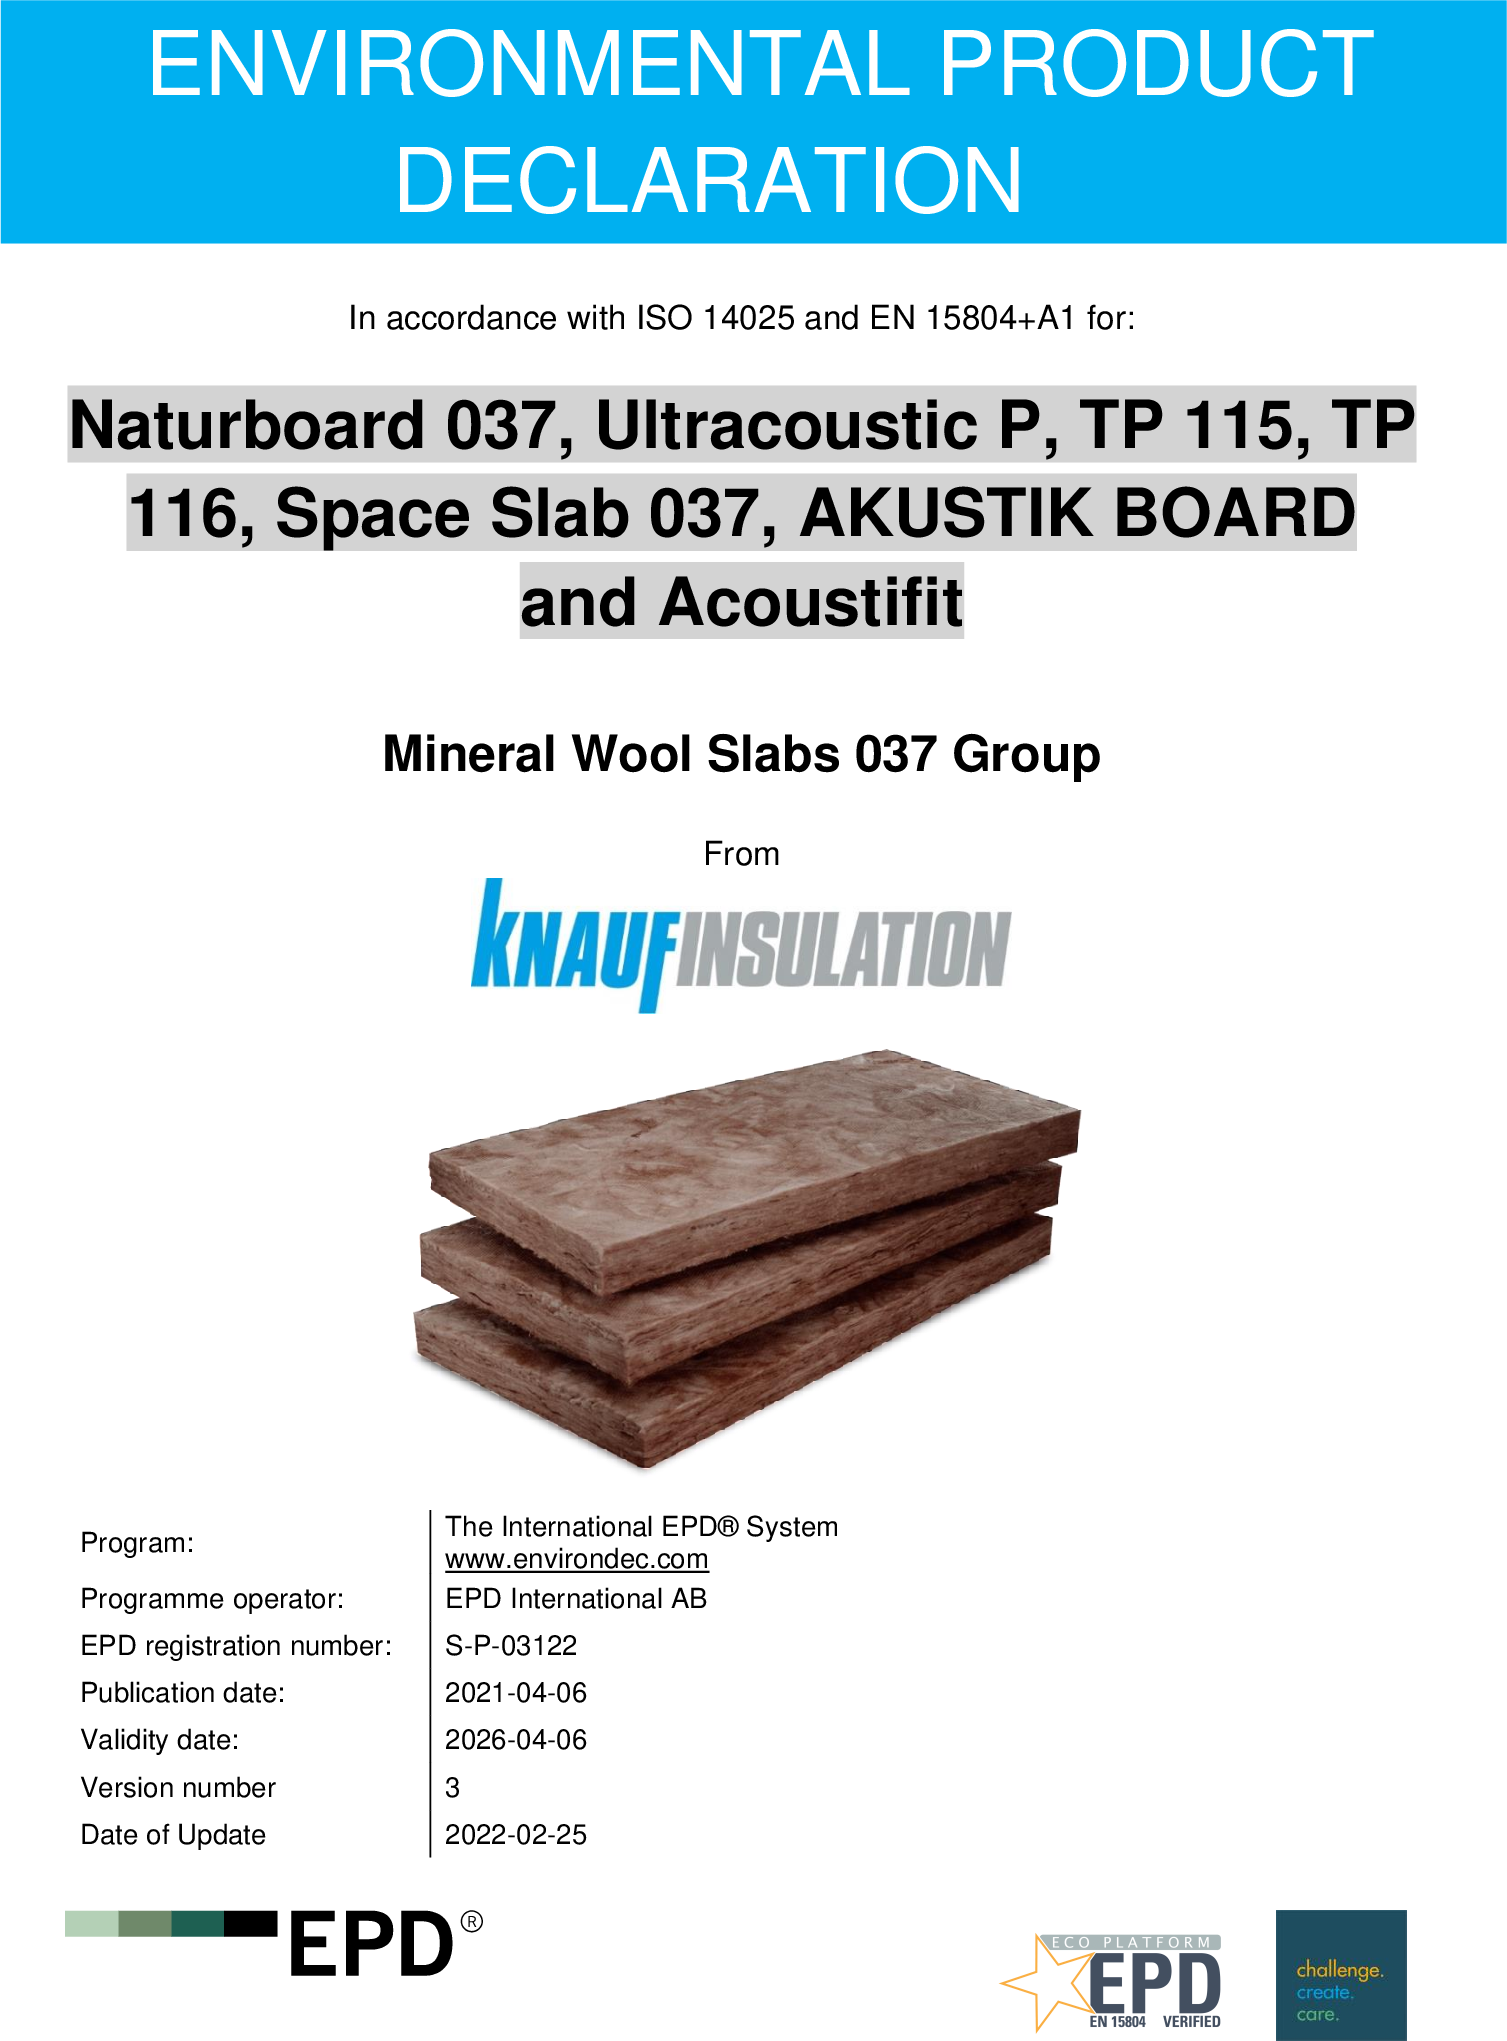 Naturboard 037, Ultracoustic P, TP 115, TP 116, Space Slab 037, AKUSTIK BOARD and Acoustifit